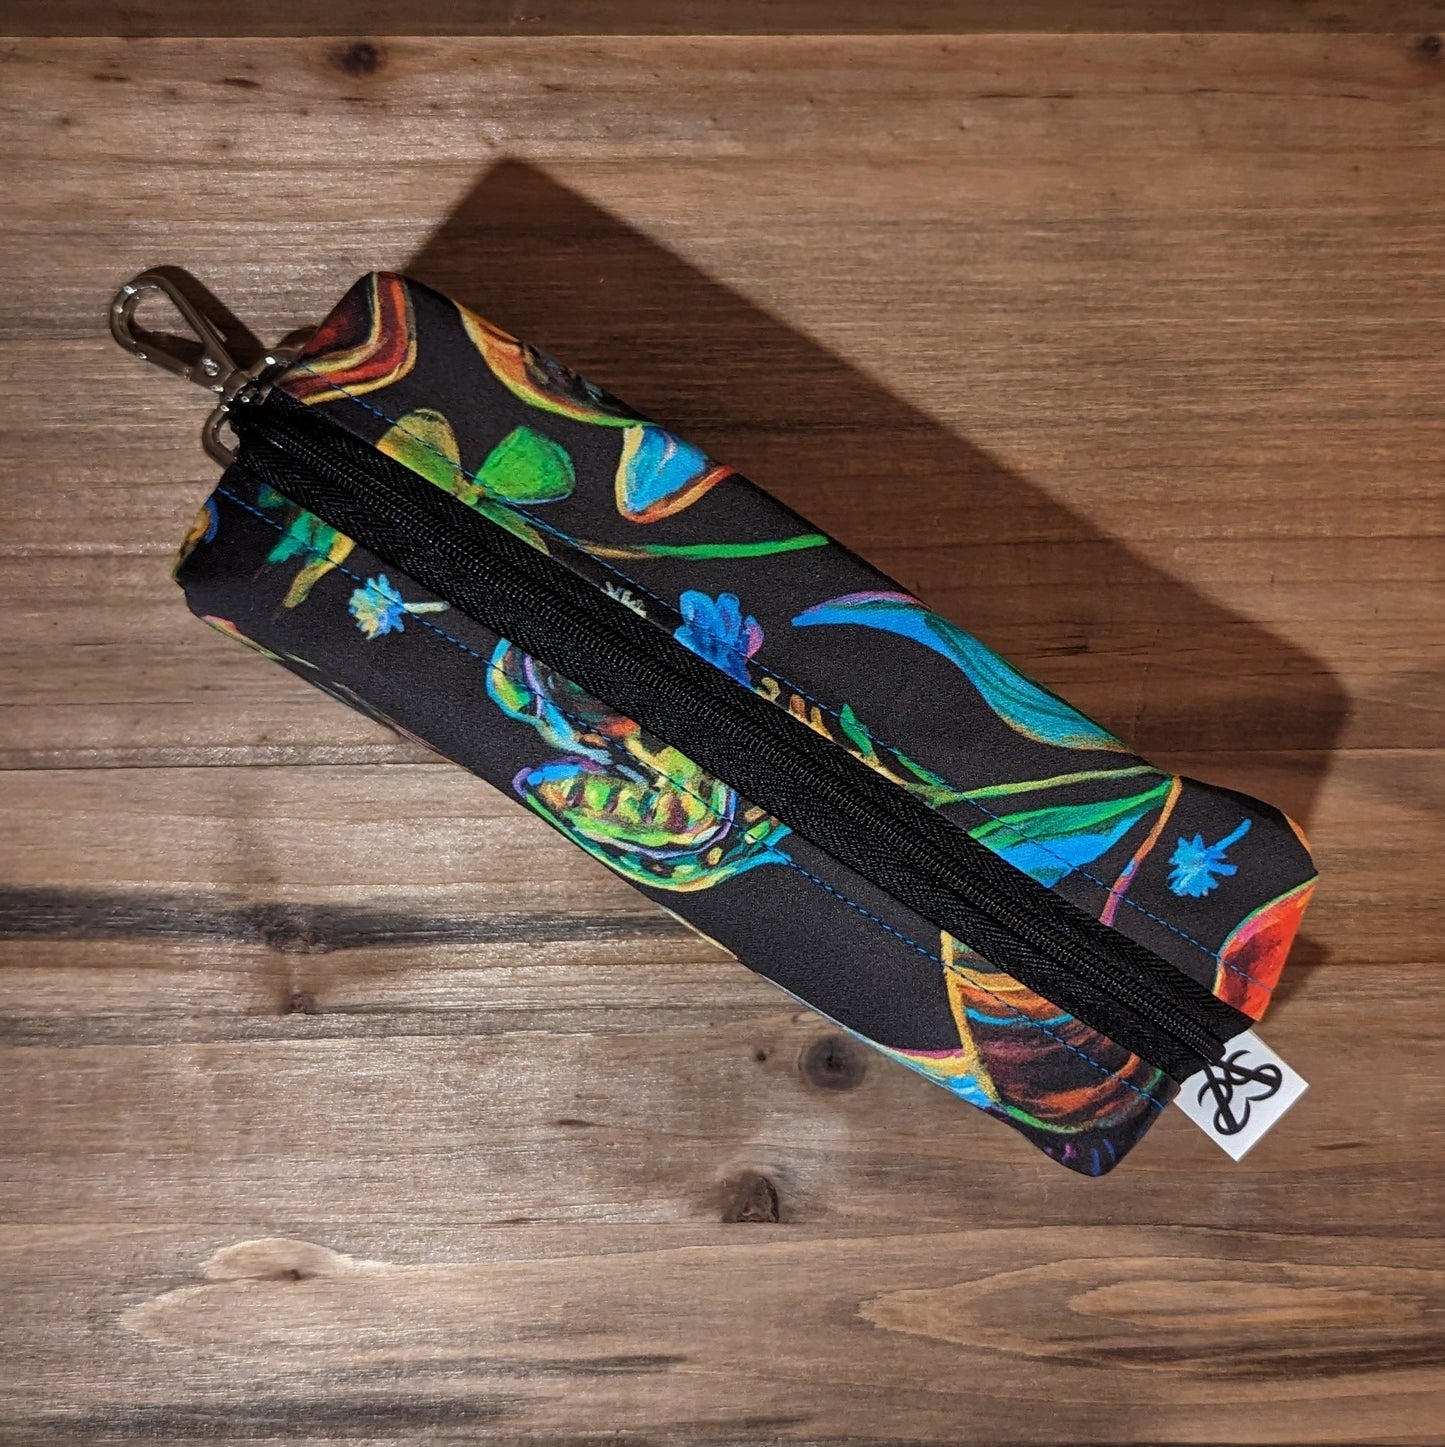 A long bag with box ends has a colorful forest pattern with pinecones, snails, frogs, acorns, florals, and keys, a black zipper down the middle, and a keychain clip on the top box shaped end.